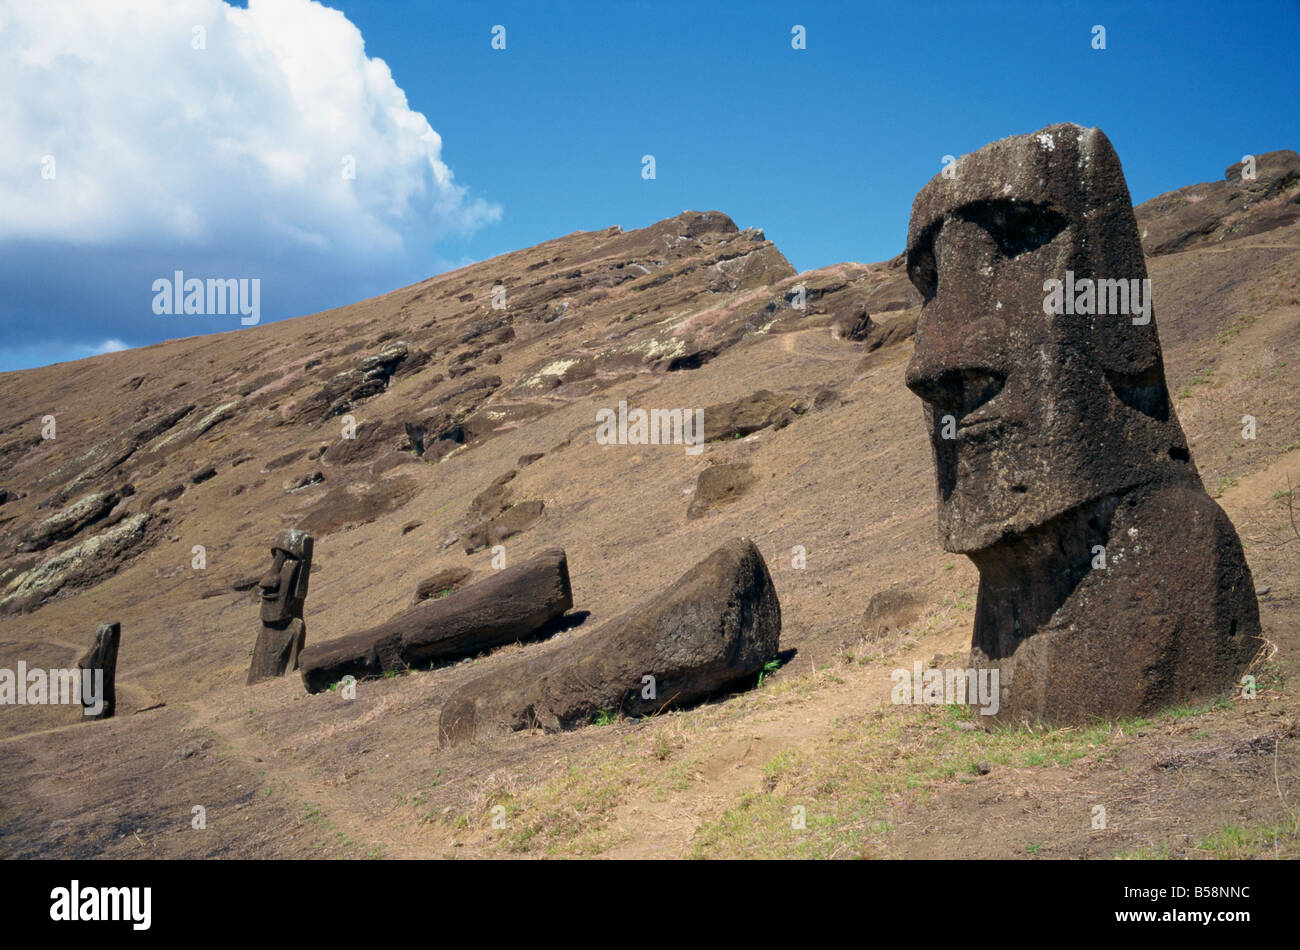 A partly finished Moai statue in the quarry inside the crater at Rano Raraku on Easter Island Chile Pacific G Renner Stock Photo